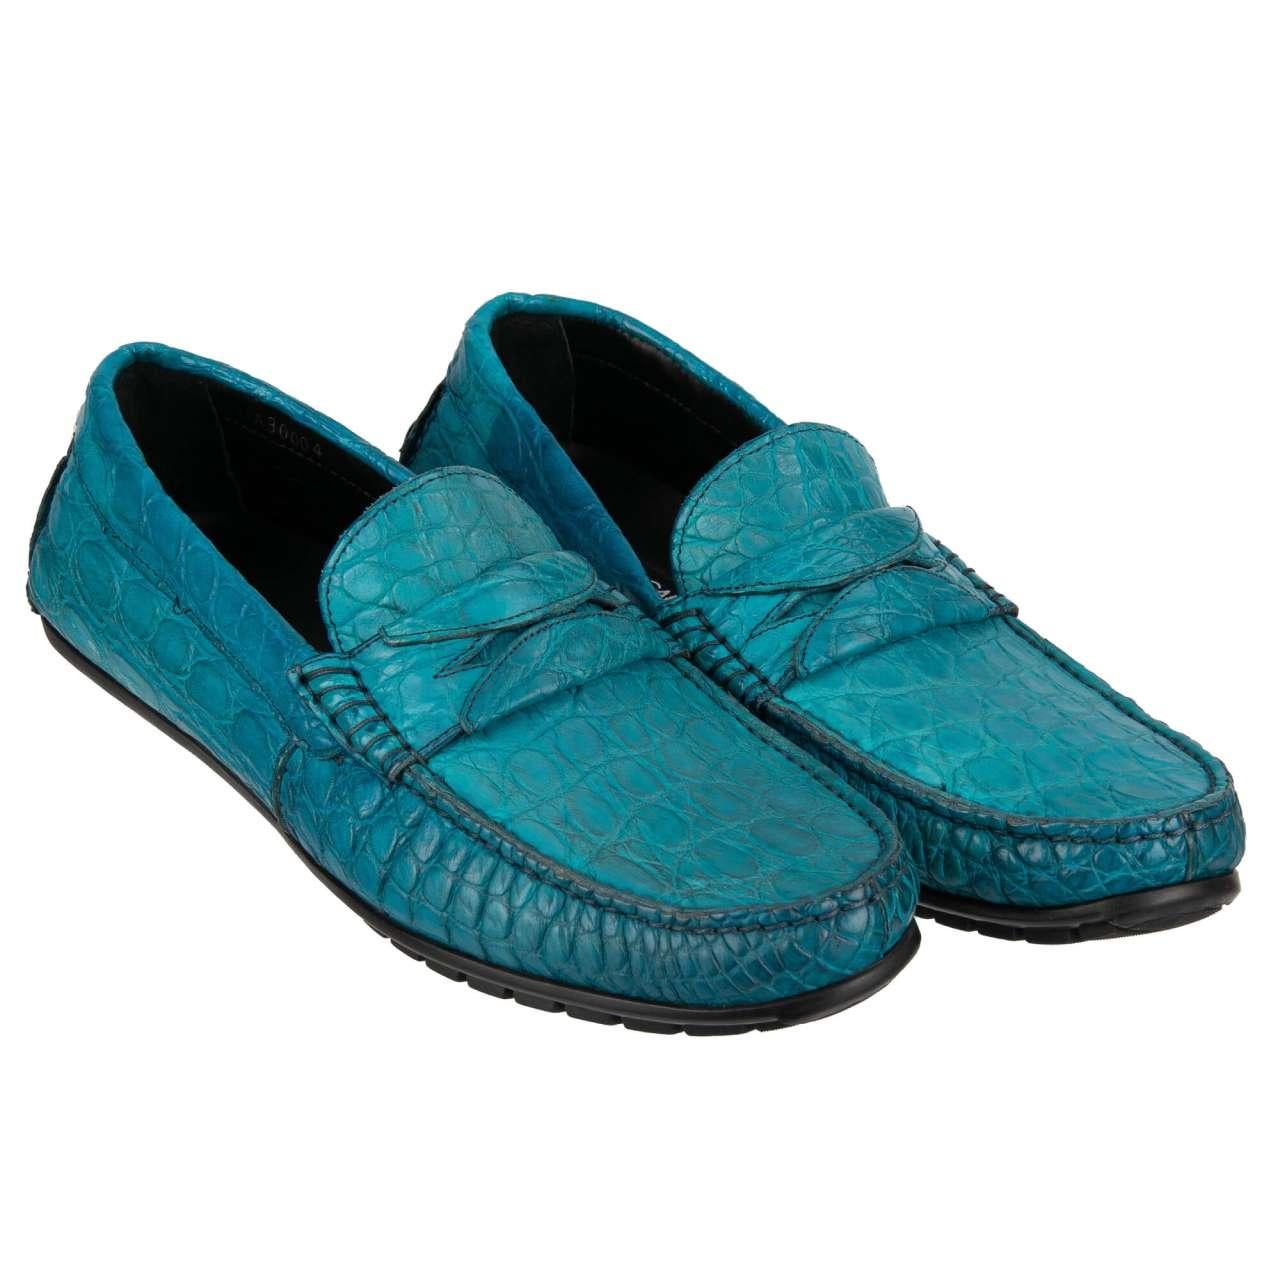 - Very exclusive and rare, crocodile leather loafer shoes in turquoise blue by DOLCE & GABBANA - MADE IN ITALY - Former RRP: EUR 4.750 - New with Box - Model: A30004-A2D60-80621 - Material: 100% Caimano - Sole: Leather - Color: Blue - Leather